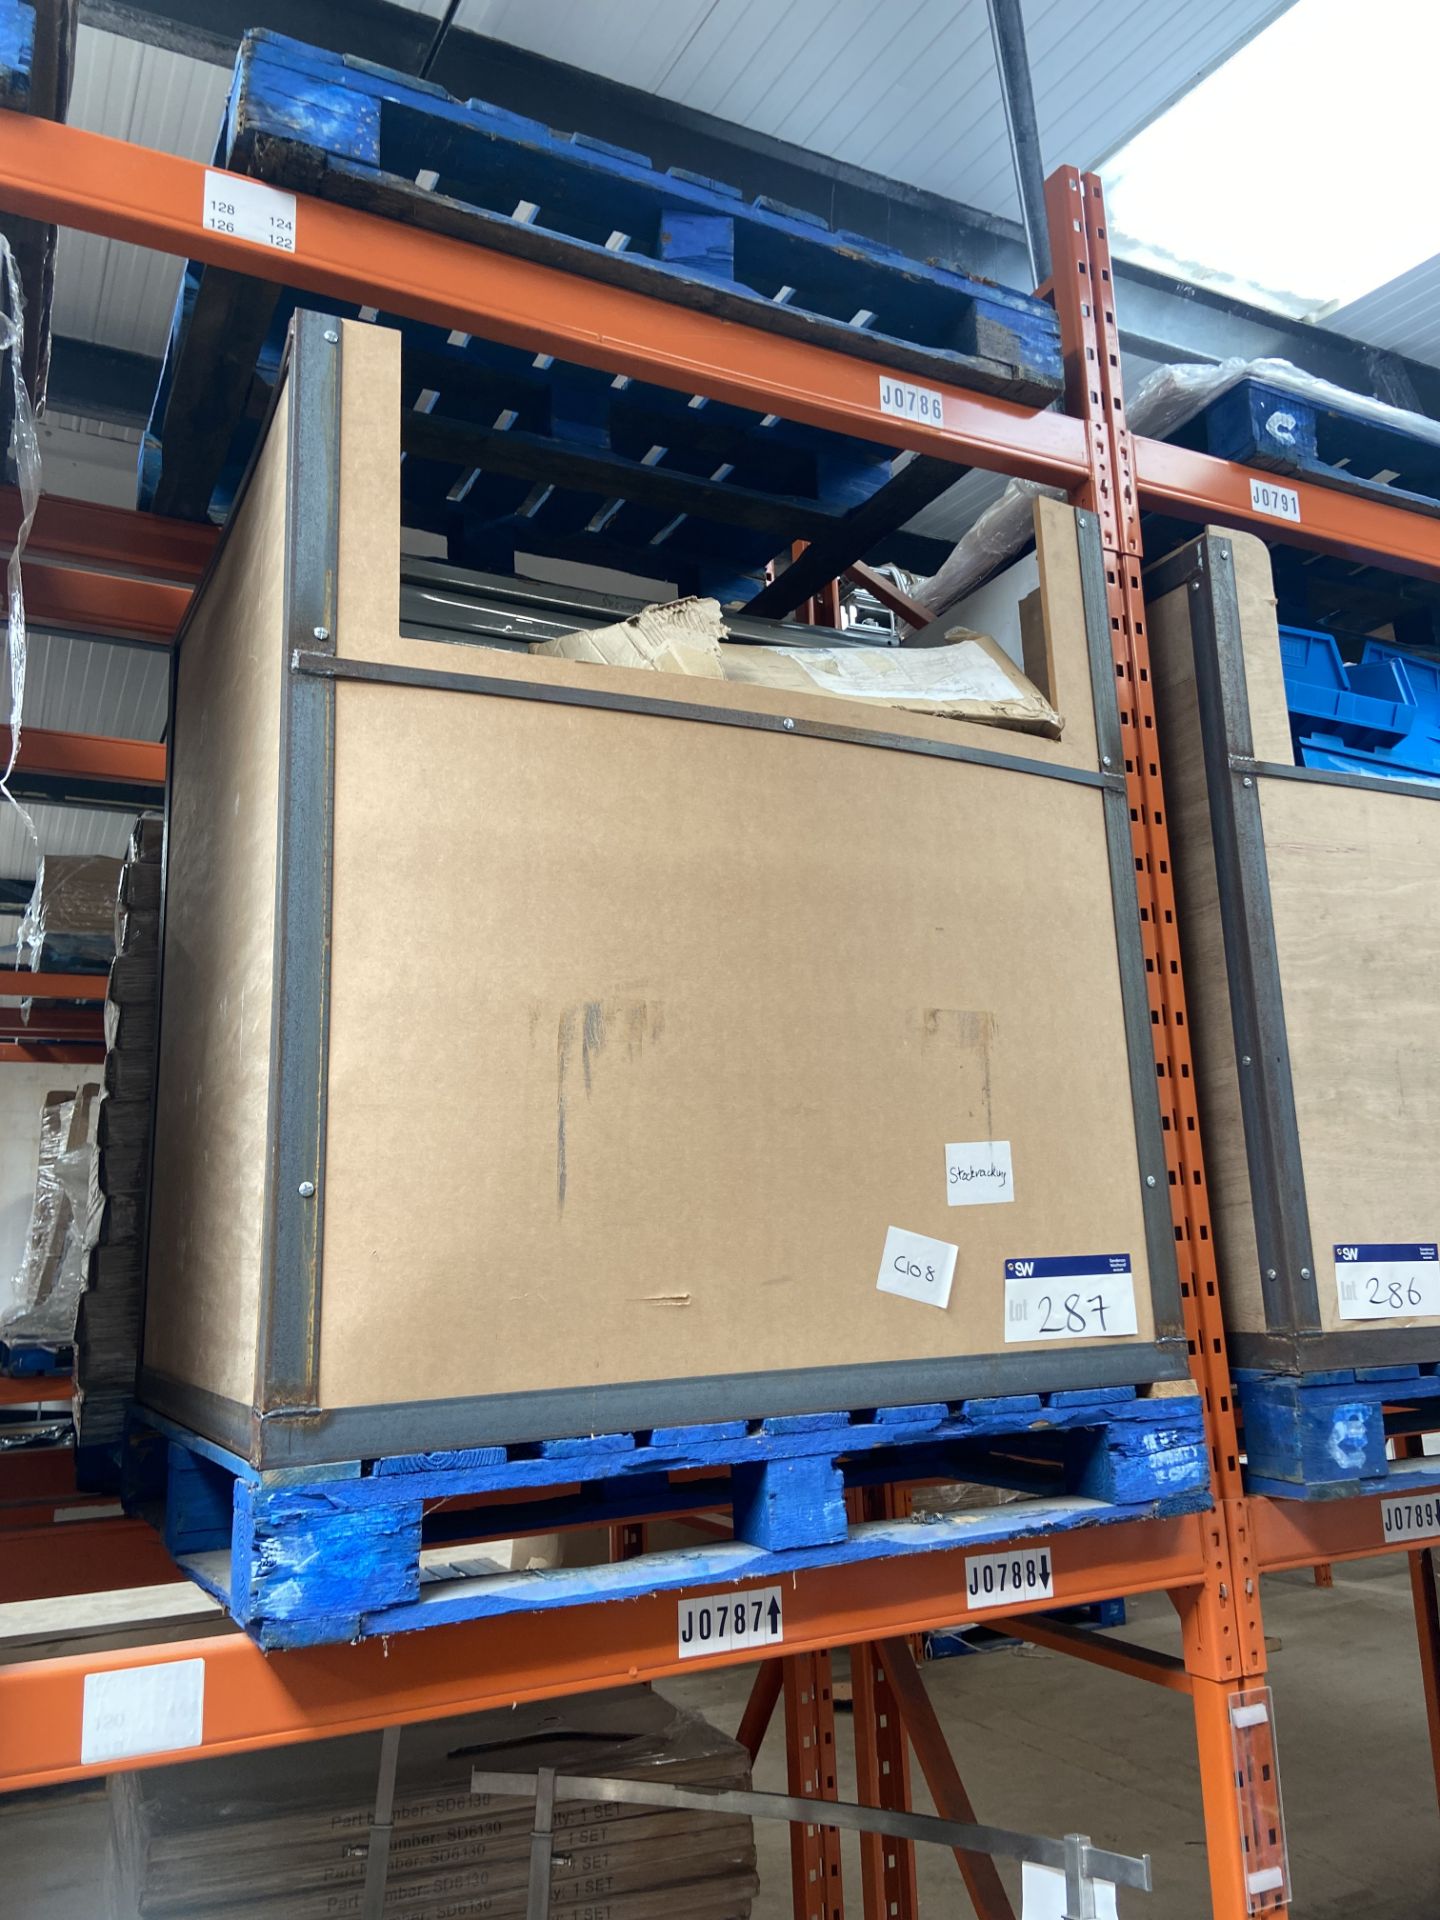 Steel Framed Product Box, with contents including steel shelf and shelving components, C108 (J0787),